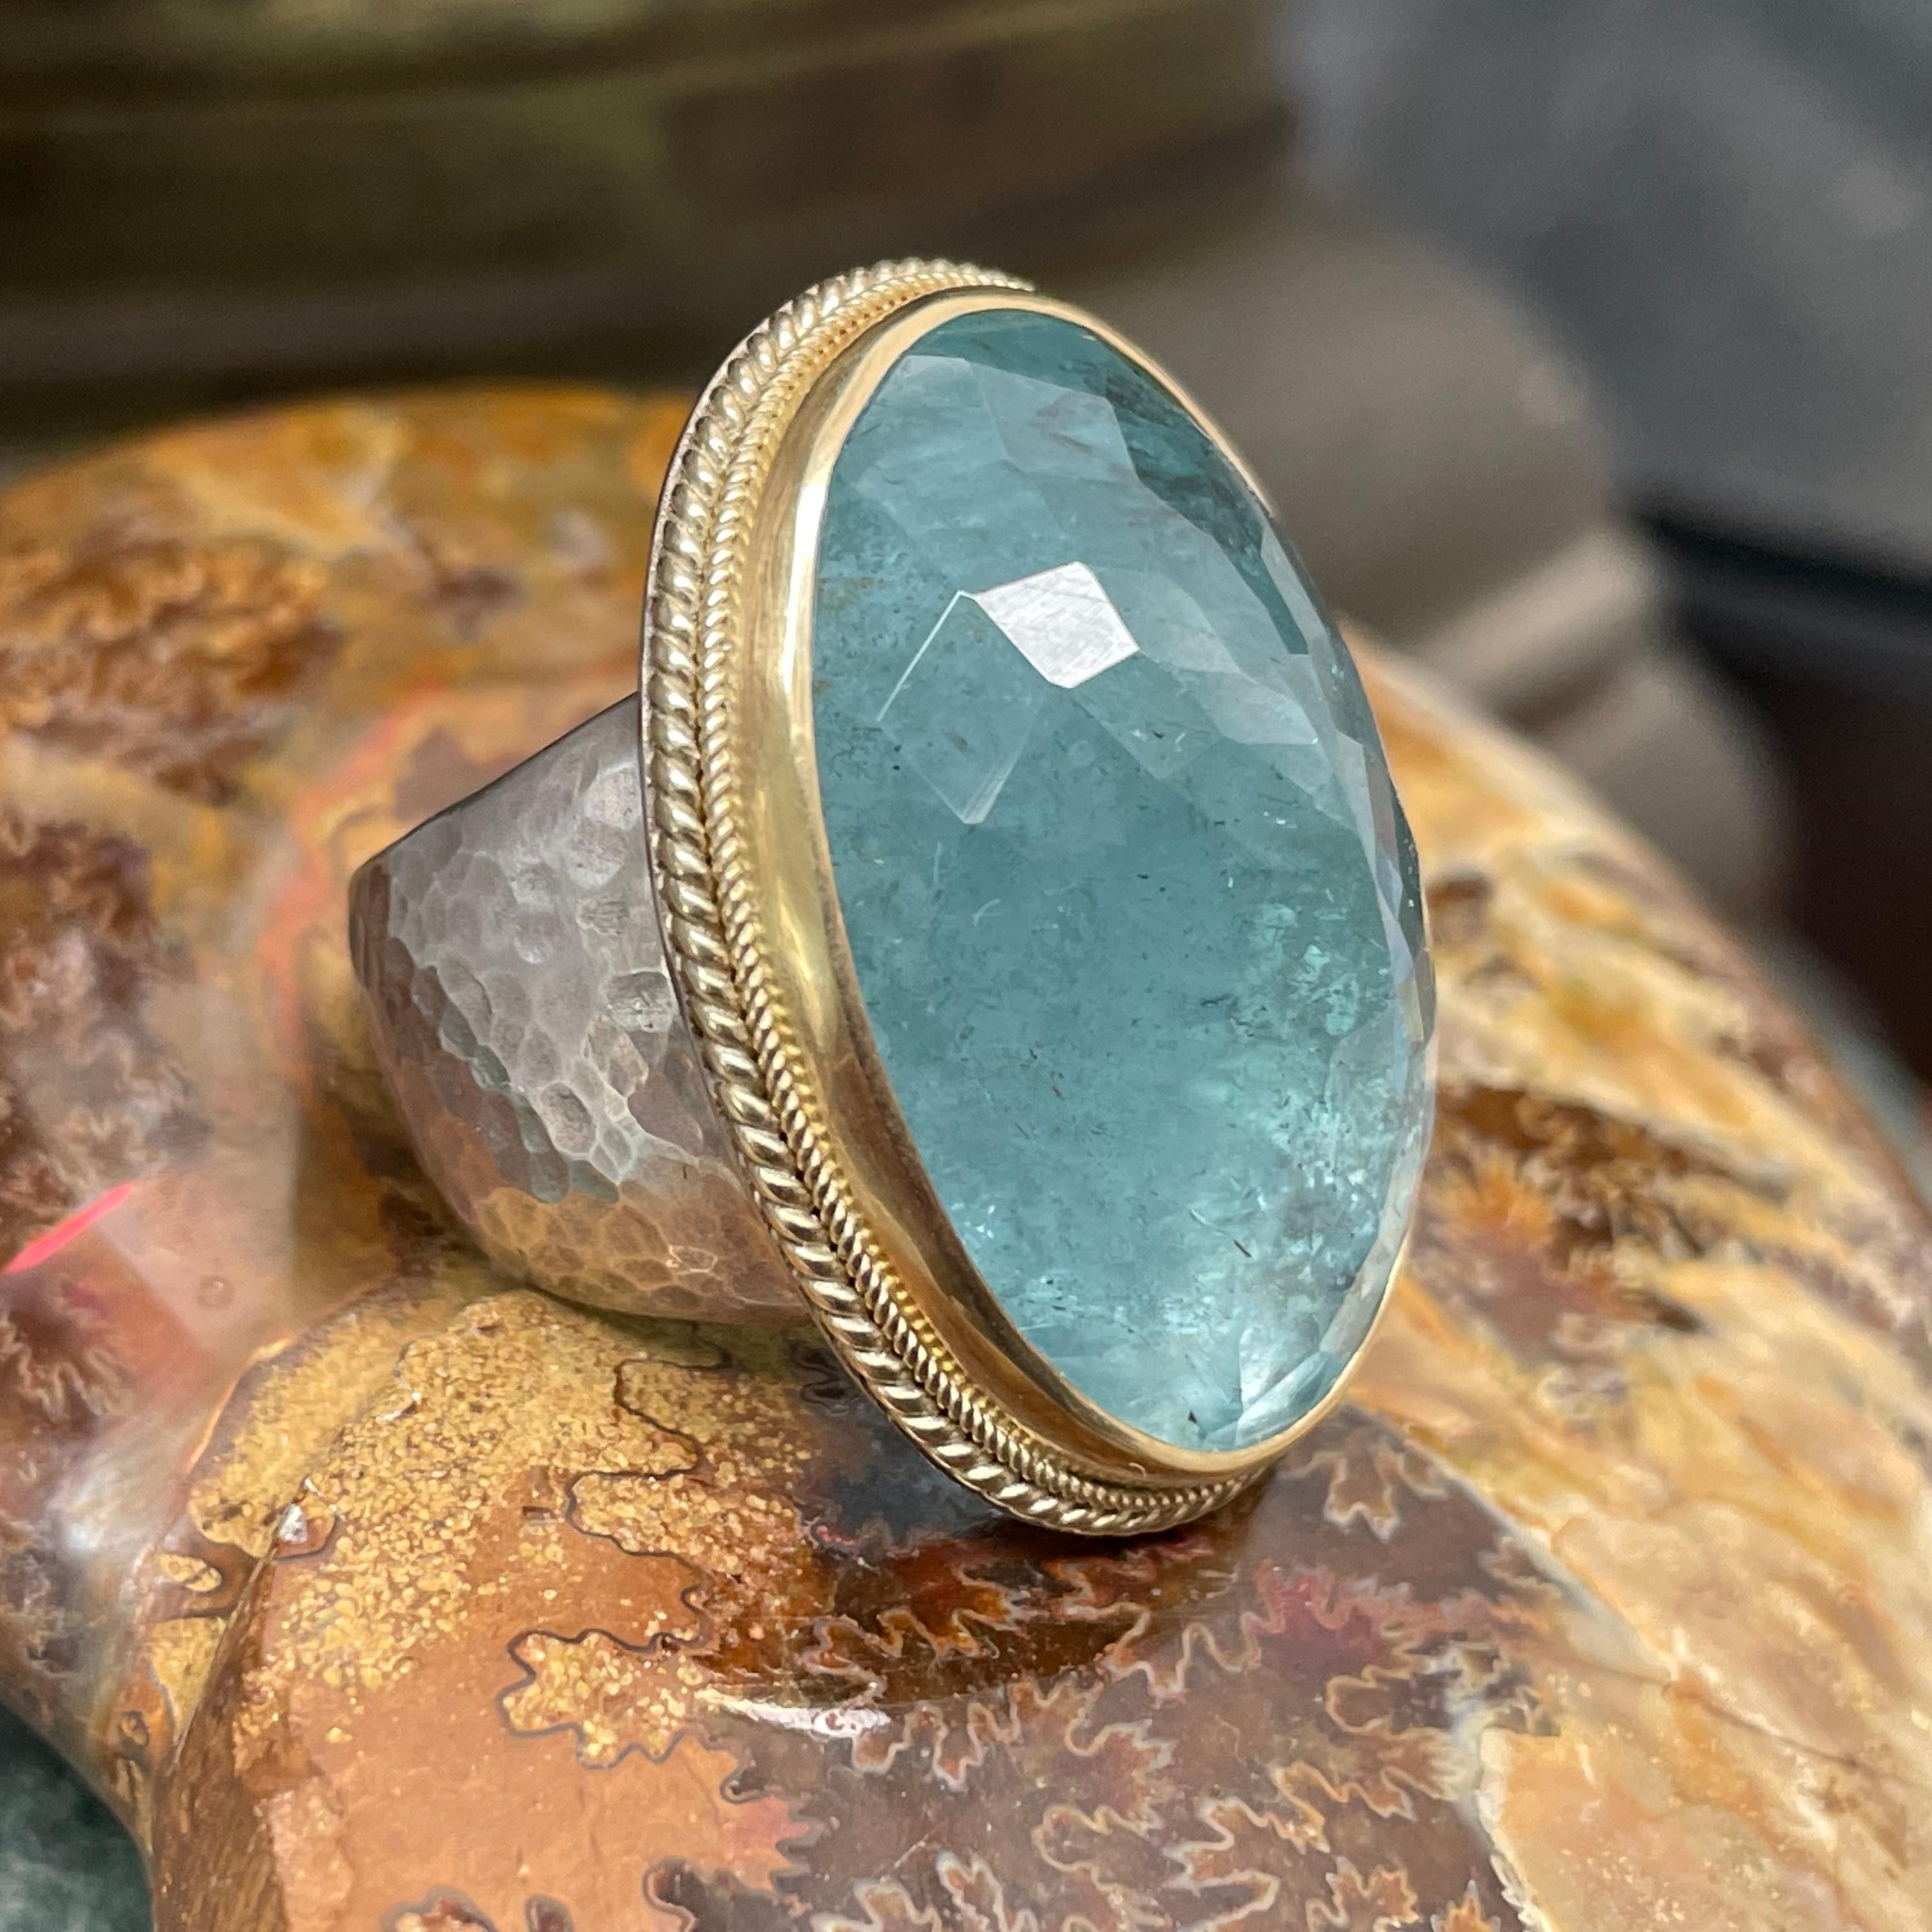 A nice light blue 20 x 28 mm oval rose cut aquamarine is held in a signature large/small double twist wire 18K setting atop a wide tapered sterling silver shank which is hammered and matte-finished. This stone glows with internal chatoyancy... The